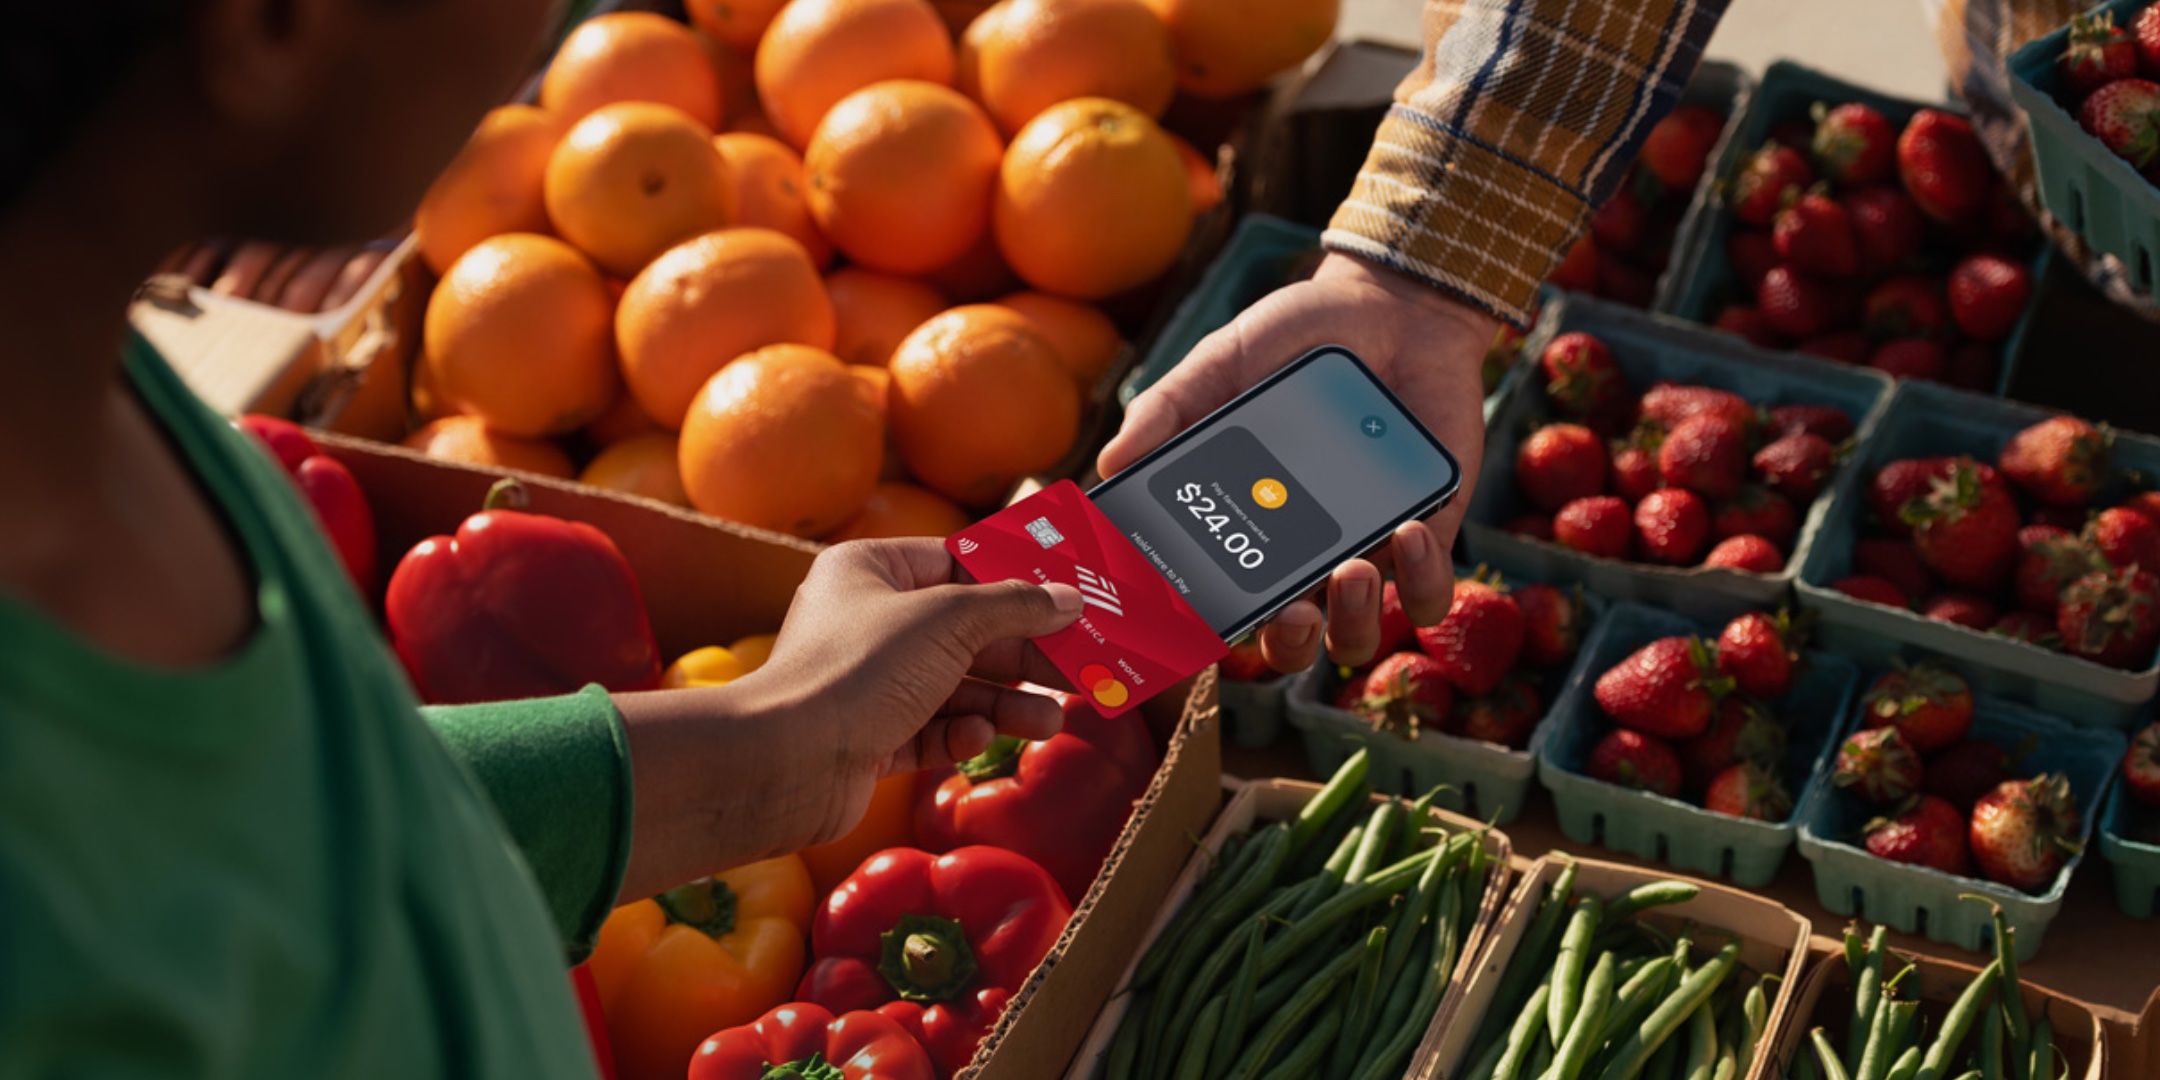 Promo image for Apple's Tap To Pay using credit cards.